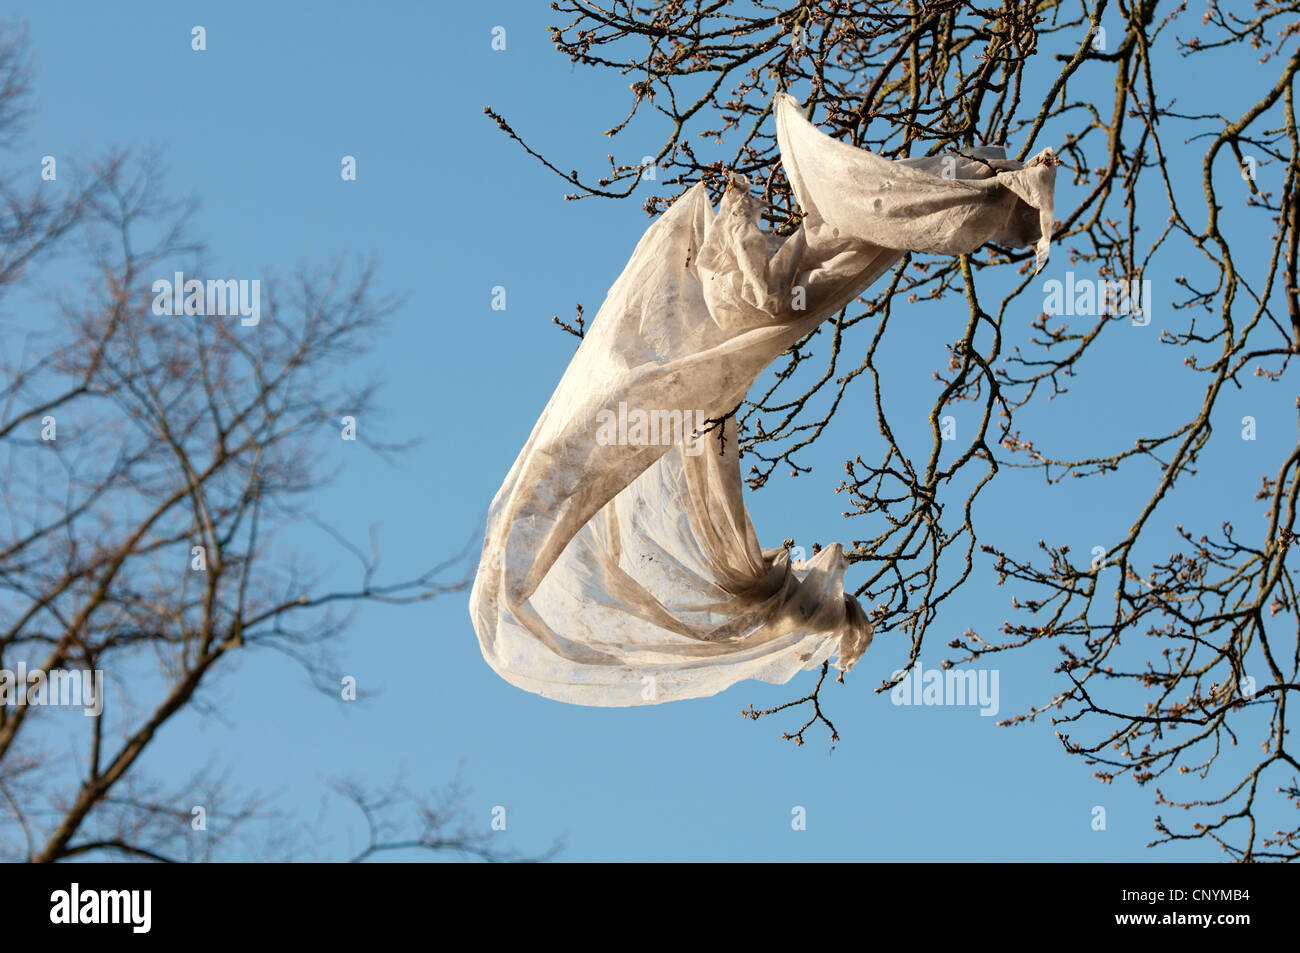 Horticultural fleece material caught in a tree Stock Photo